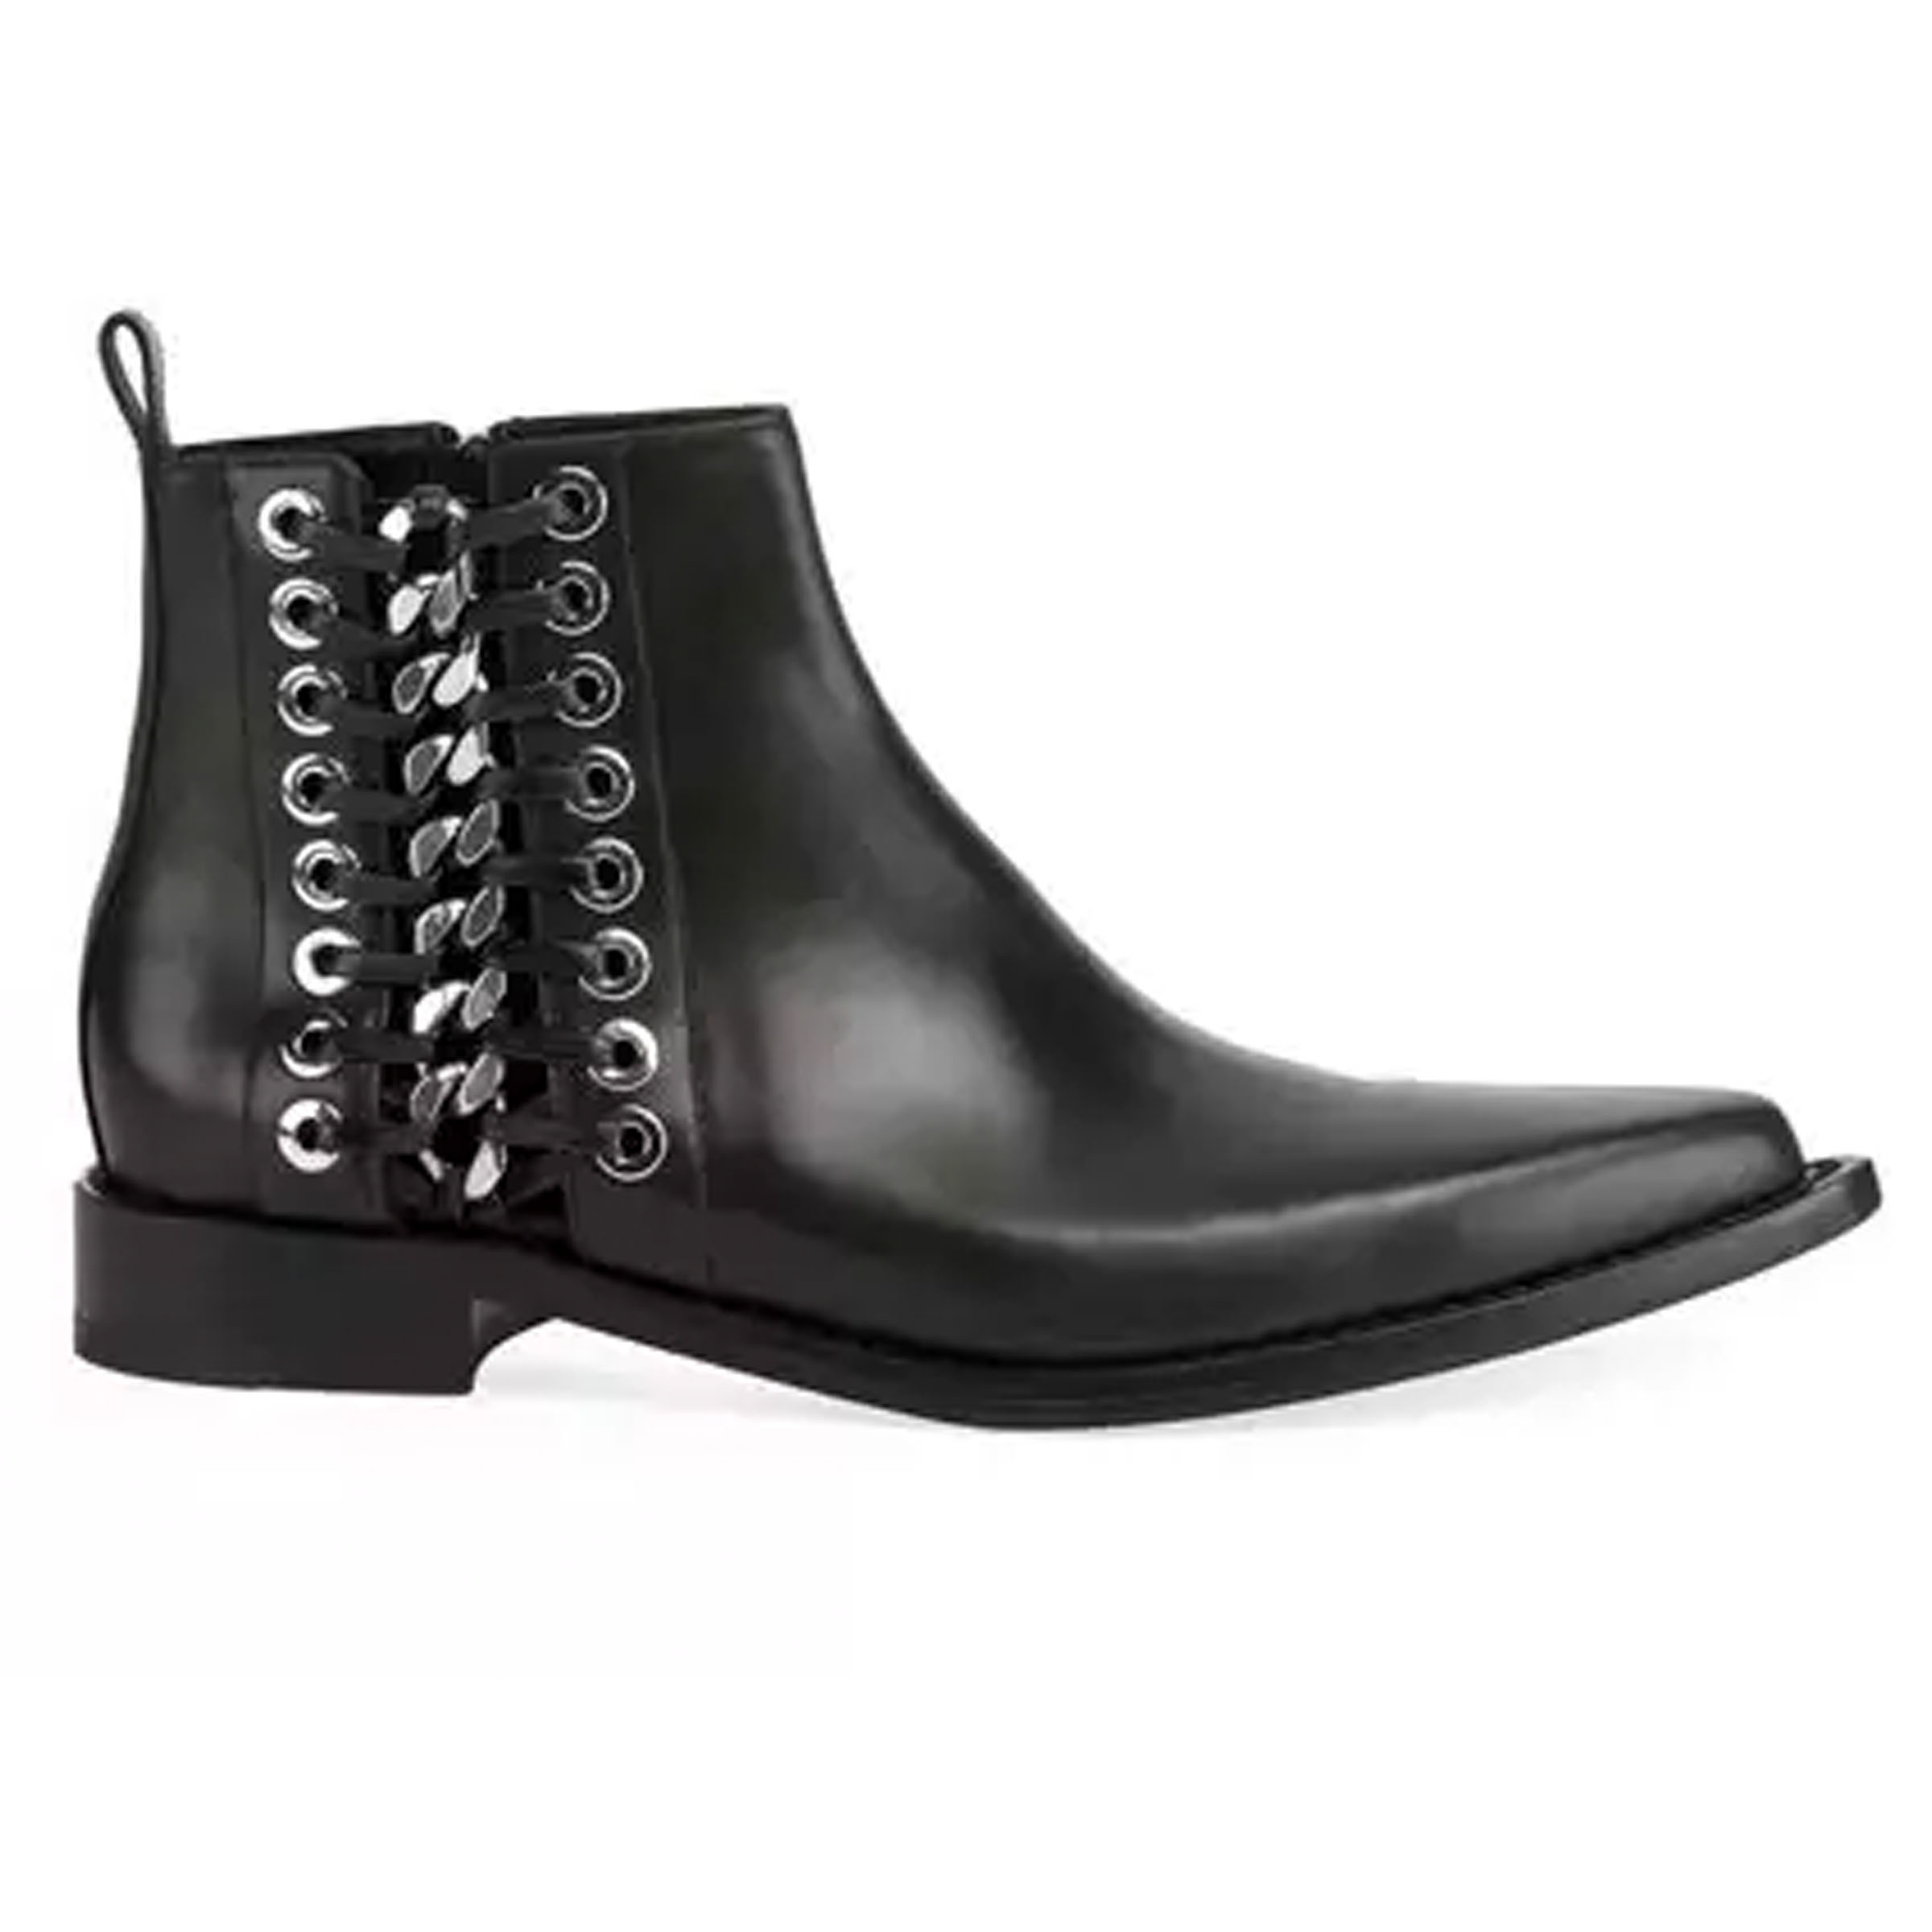 11 REINVENTED BLACK BOOTS